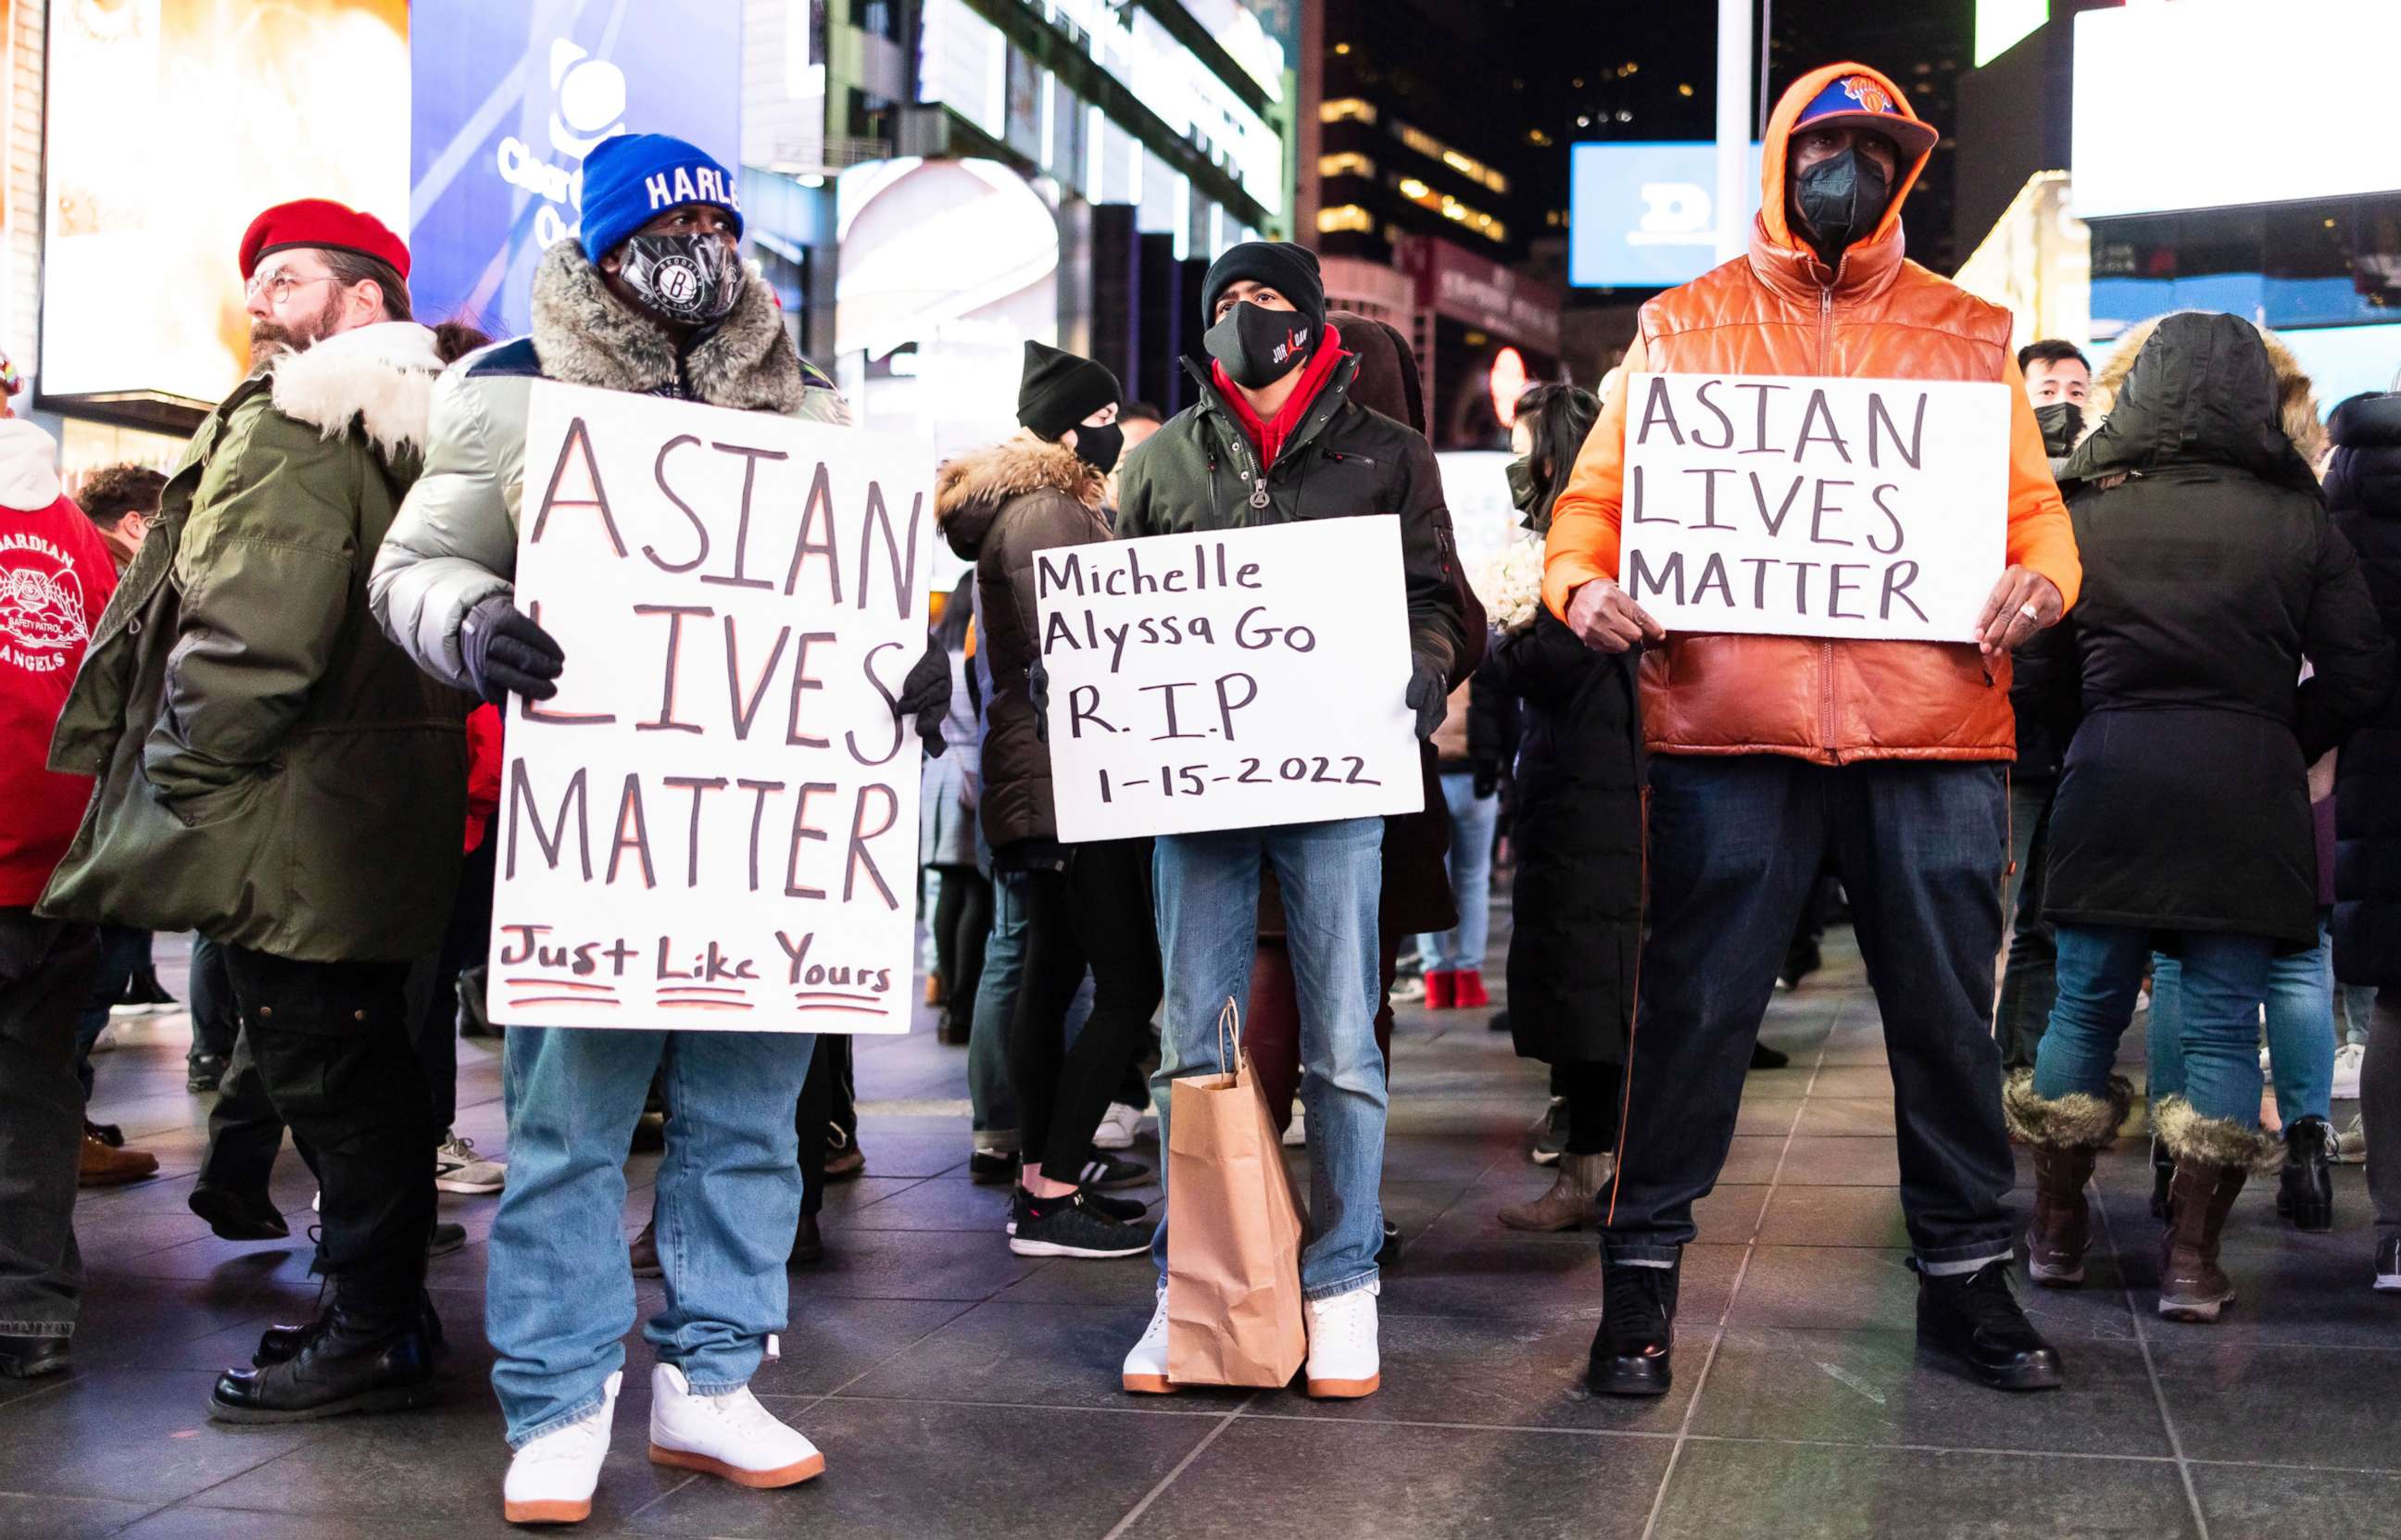 PHOTO: People gather for a vigil in honor of Michelle Alyssa Go, who was pushed in front of a subway car and killed on on Jan. 15, in Times Square in New York, Jan. 18, 2022.